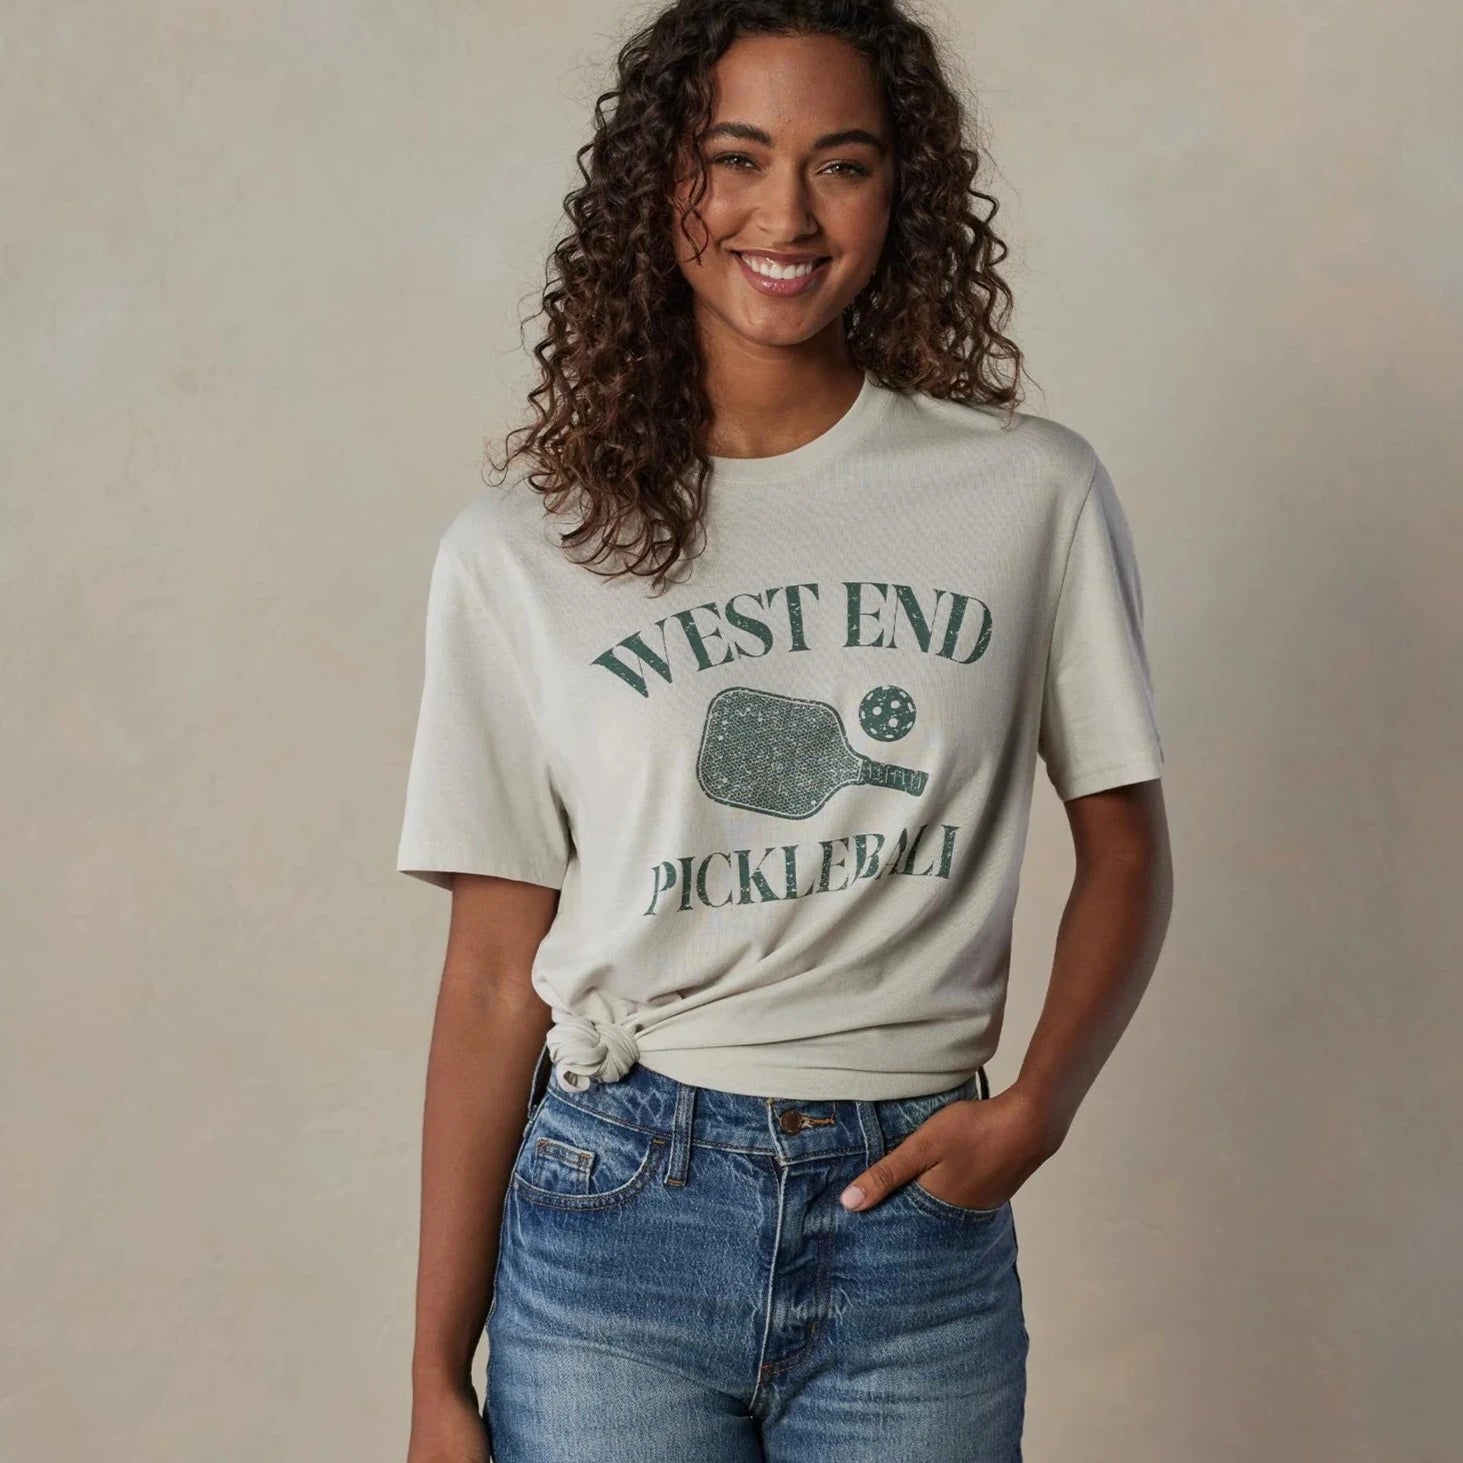 The Normal Brand West End Pickleball Tee